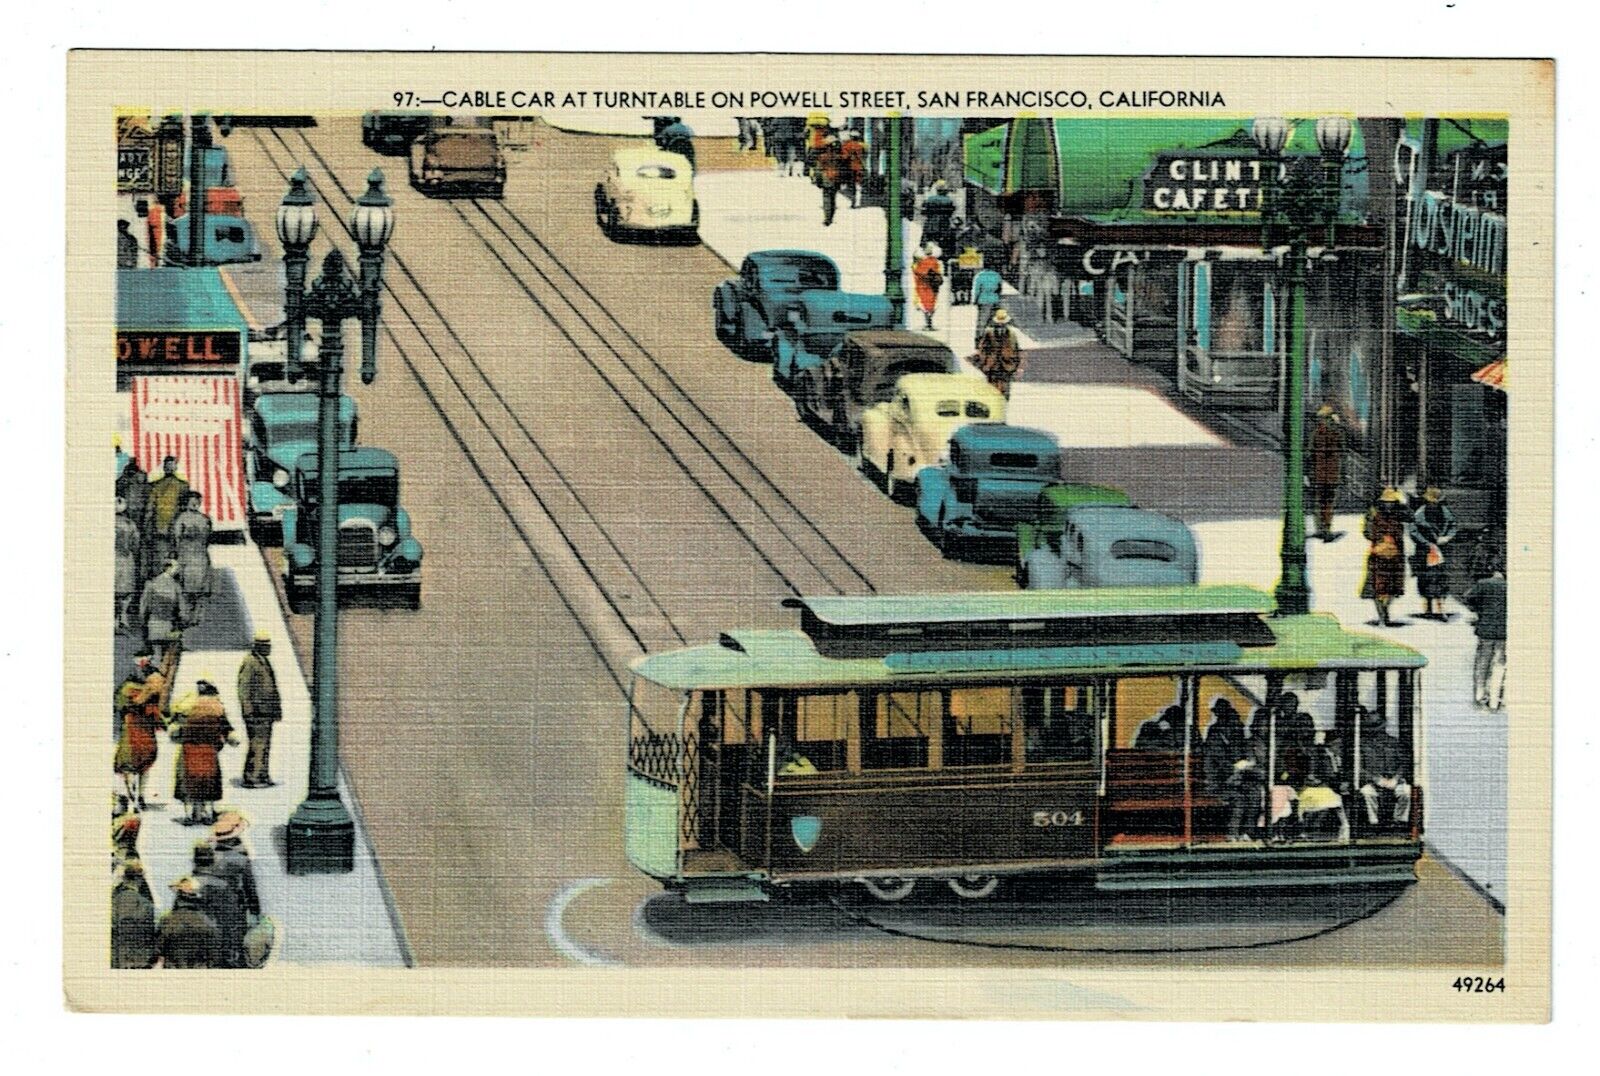 Cable car at turntable, Powell Street San Francisco CA postcard posted 1948